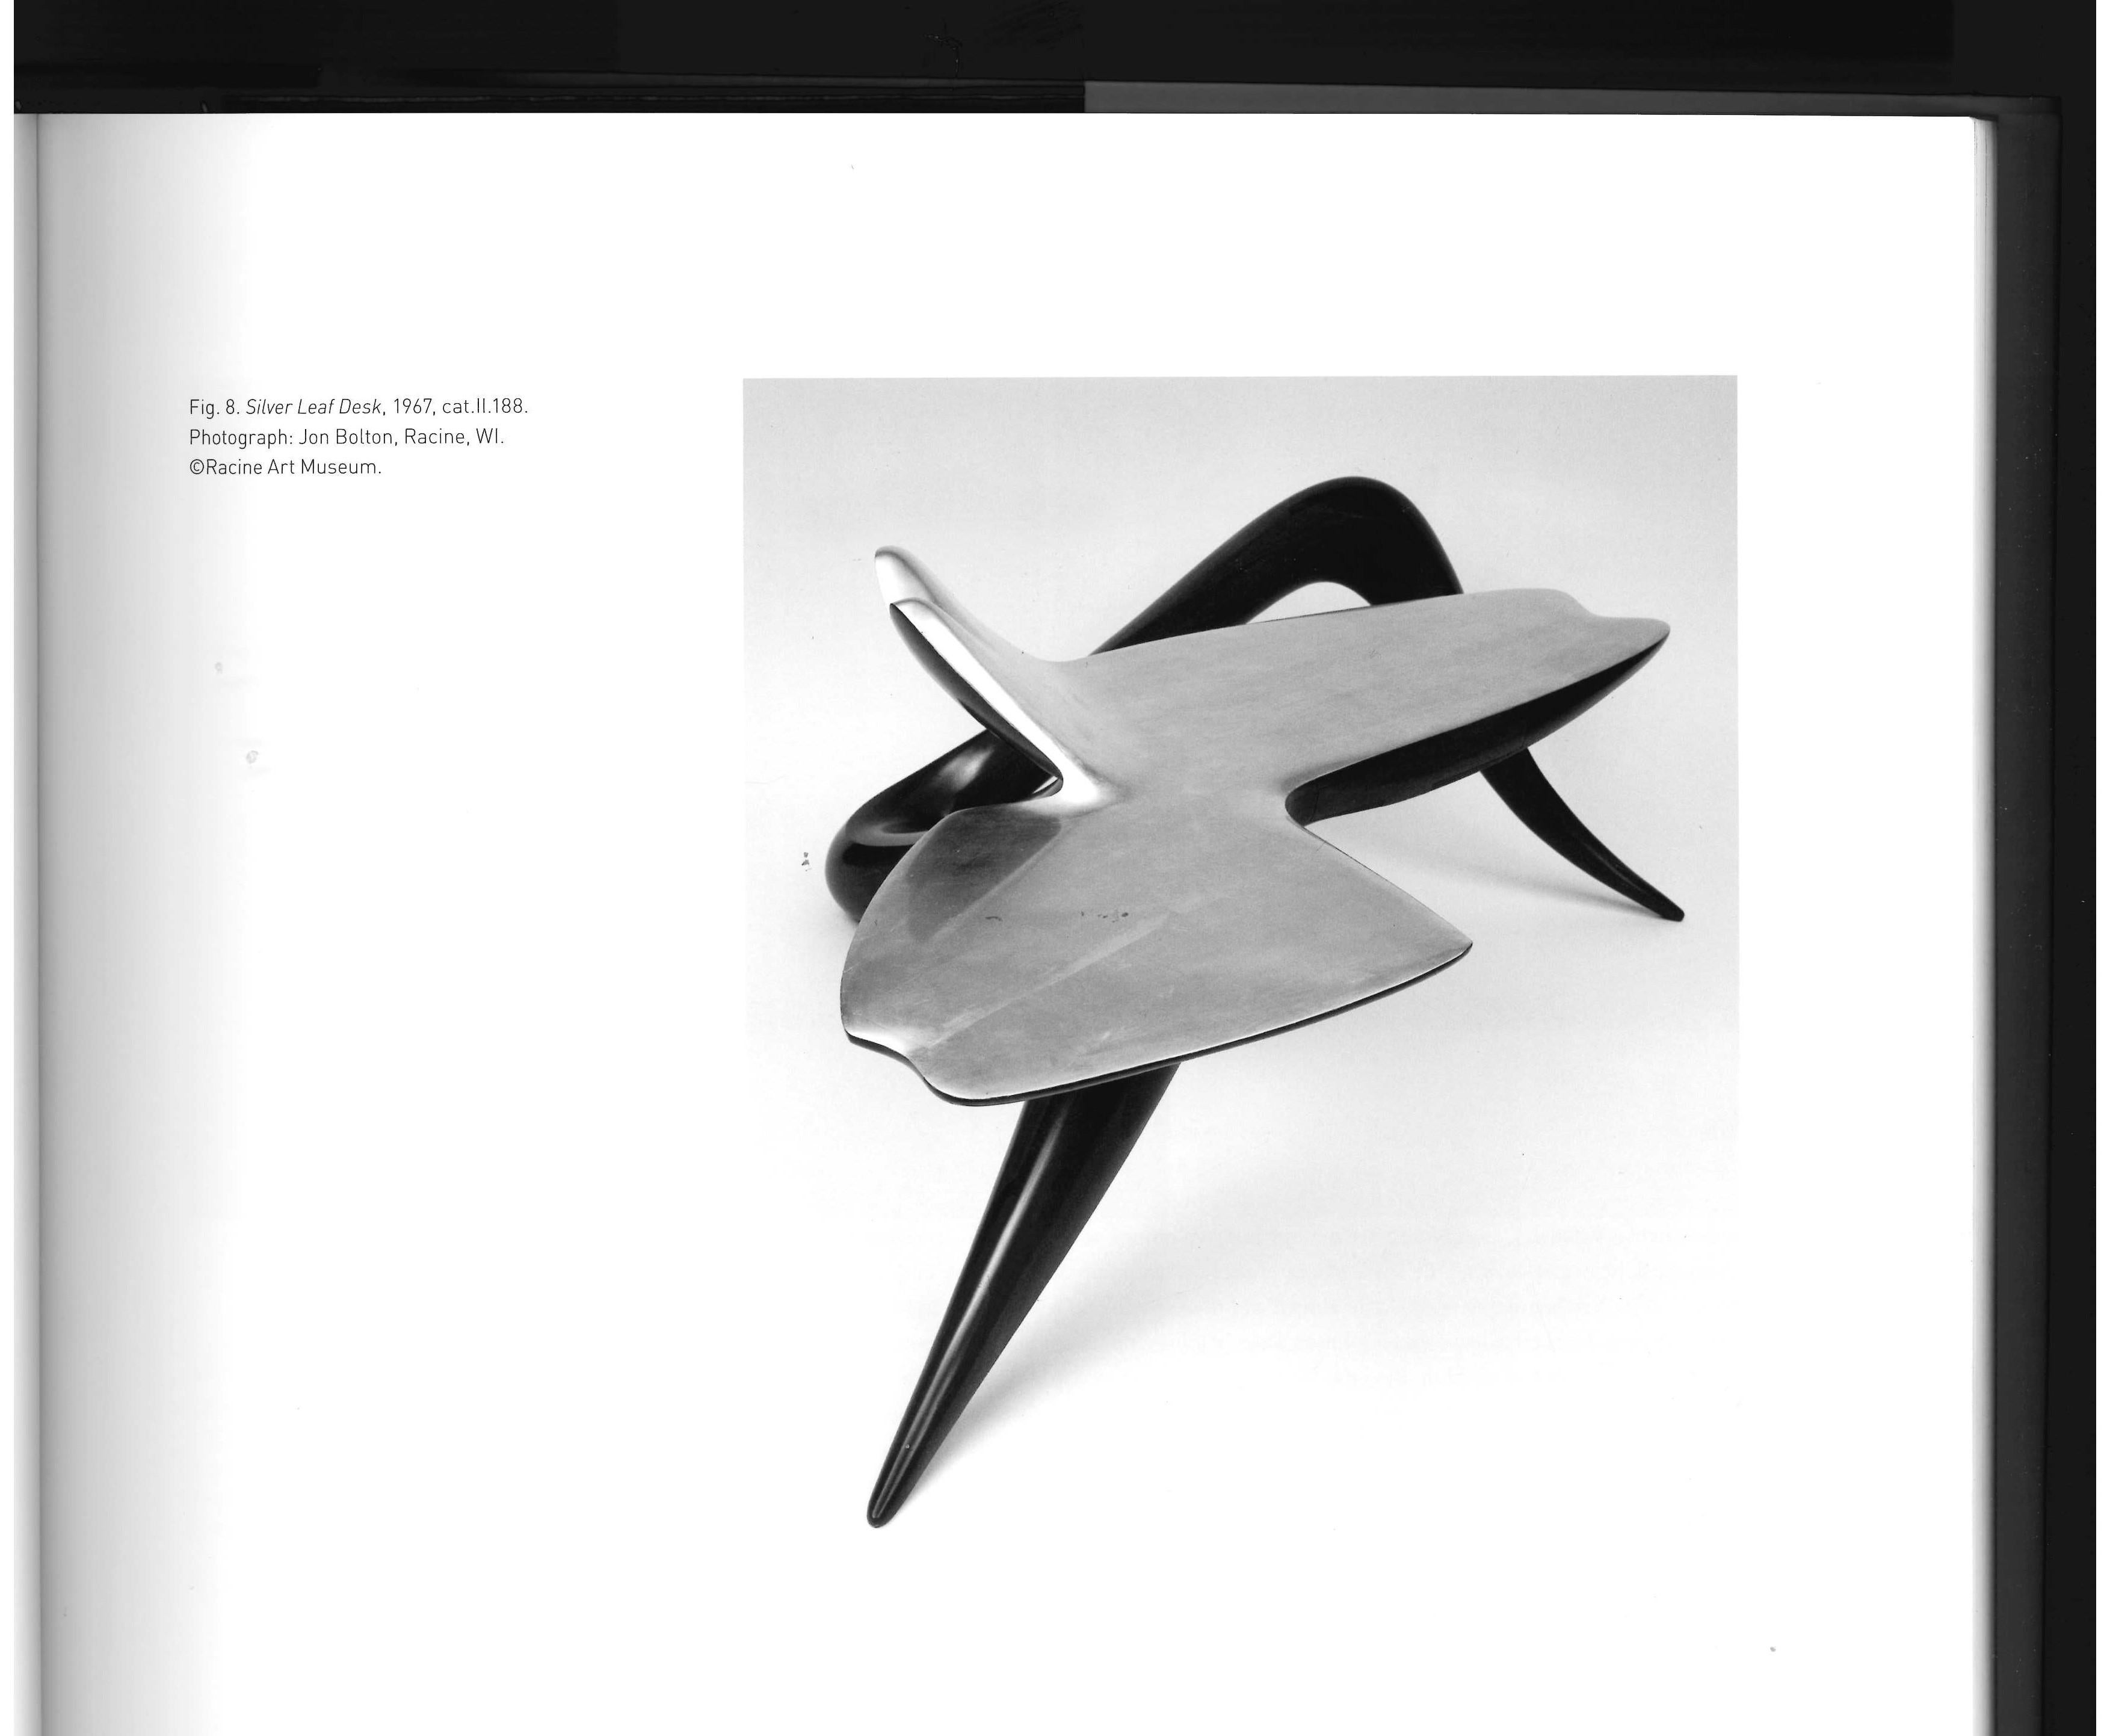 This large book is the much awaited catalogue raisonne of Wendell Castle the highly regarded furniture designer and unique craftsman, which covers a career spanning more than 50 years. Comprehensive and detailed, the catalogue includes a chronologic